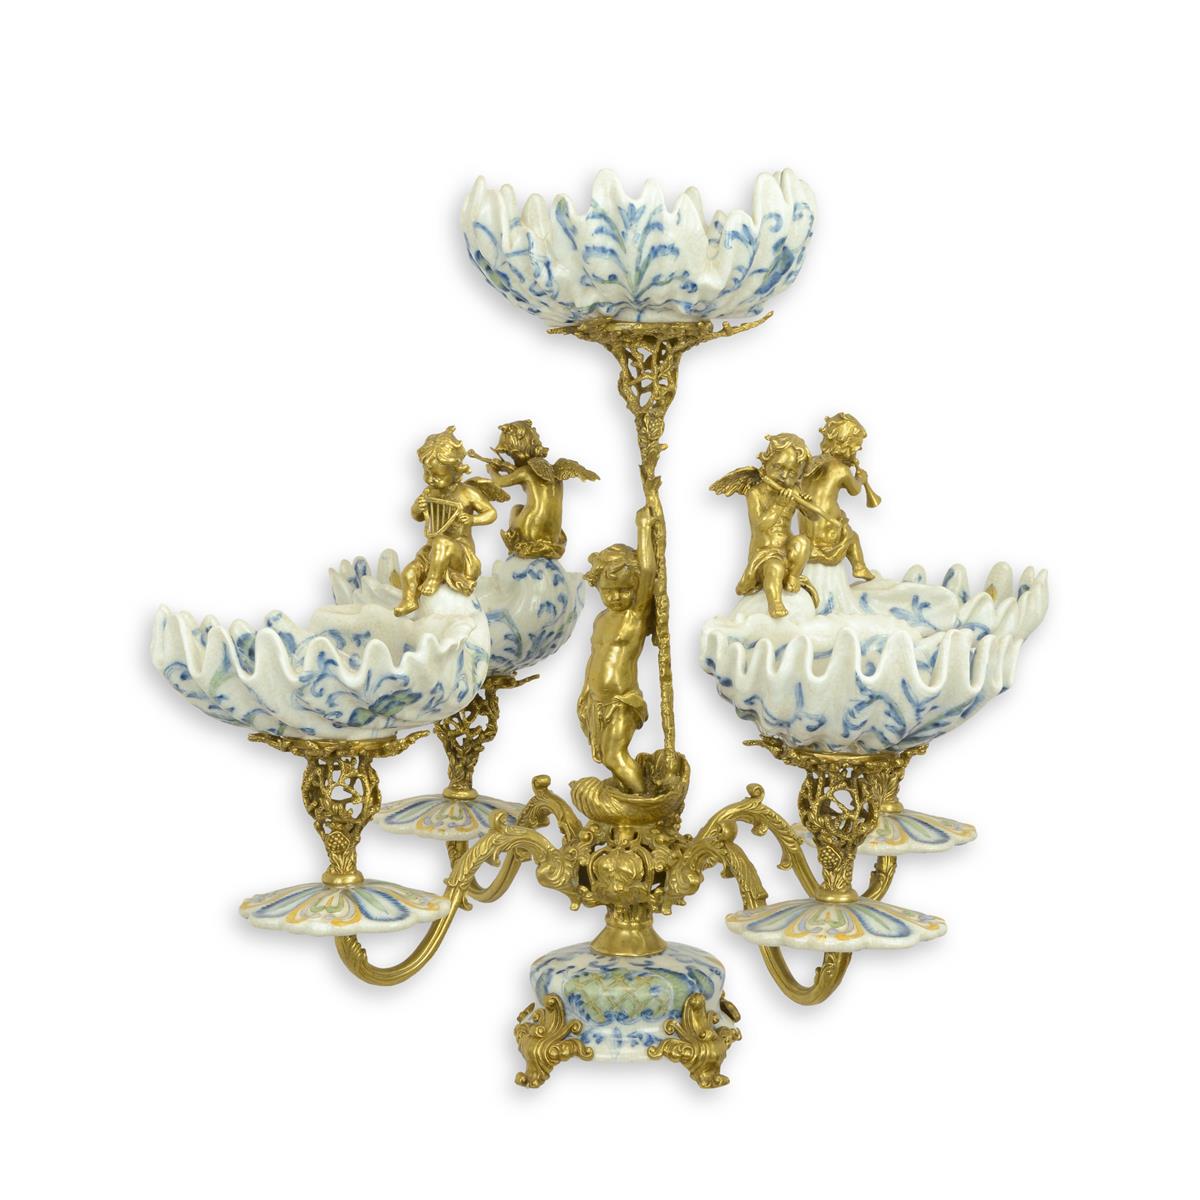 A BRASS MOUNTED PORCELAIN EPERGNE